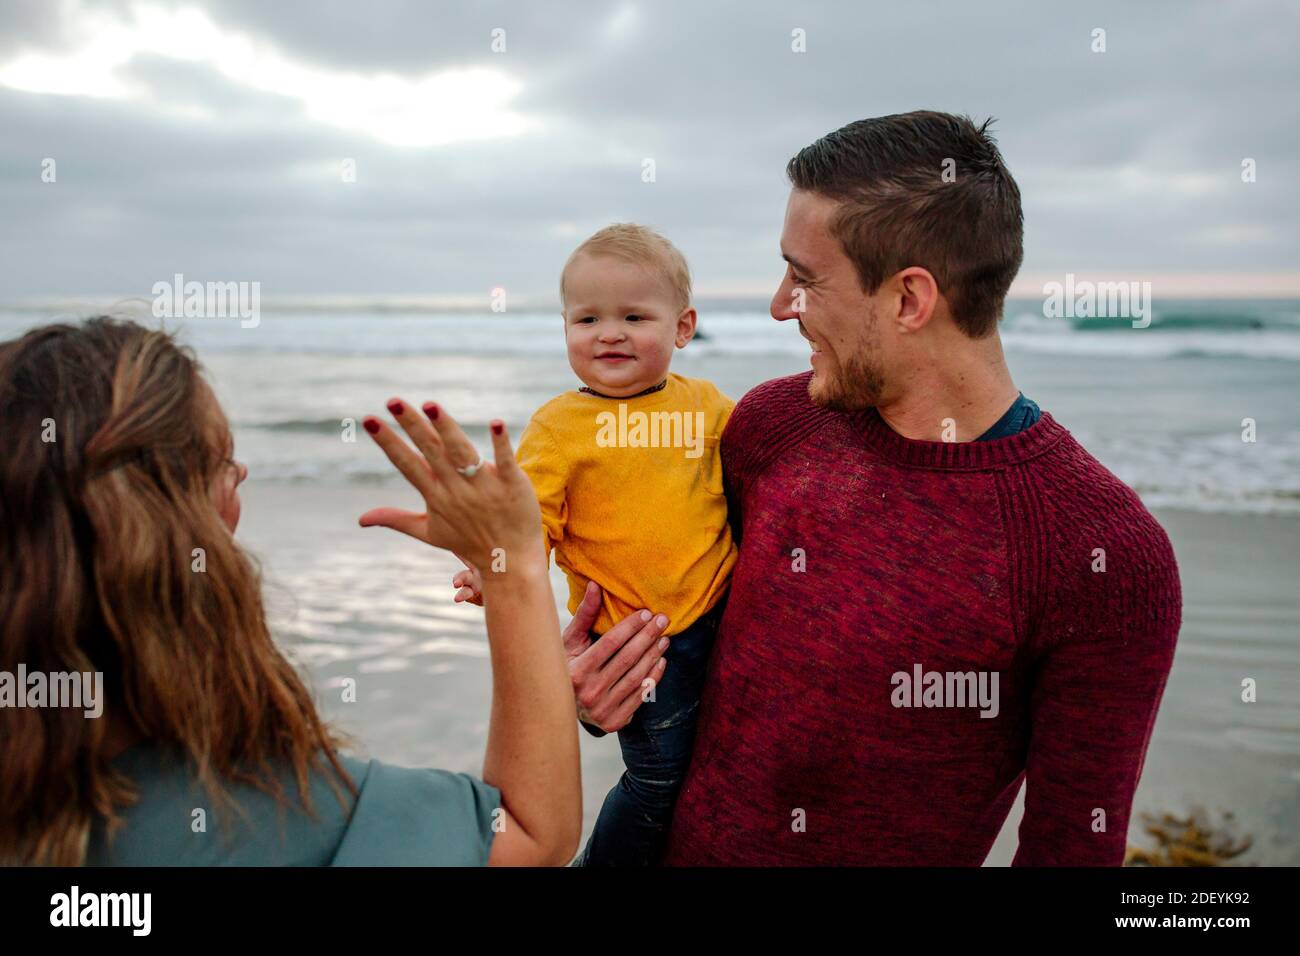 Mom high-fives baby held by dad in red sweater at the ocean Stock Photo